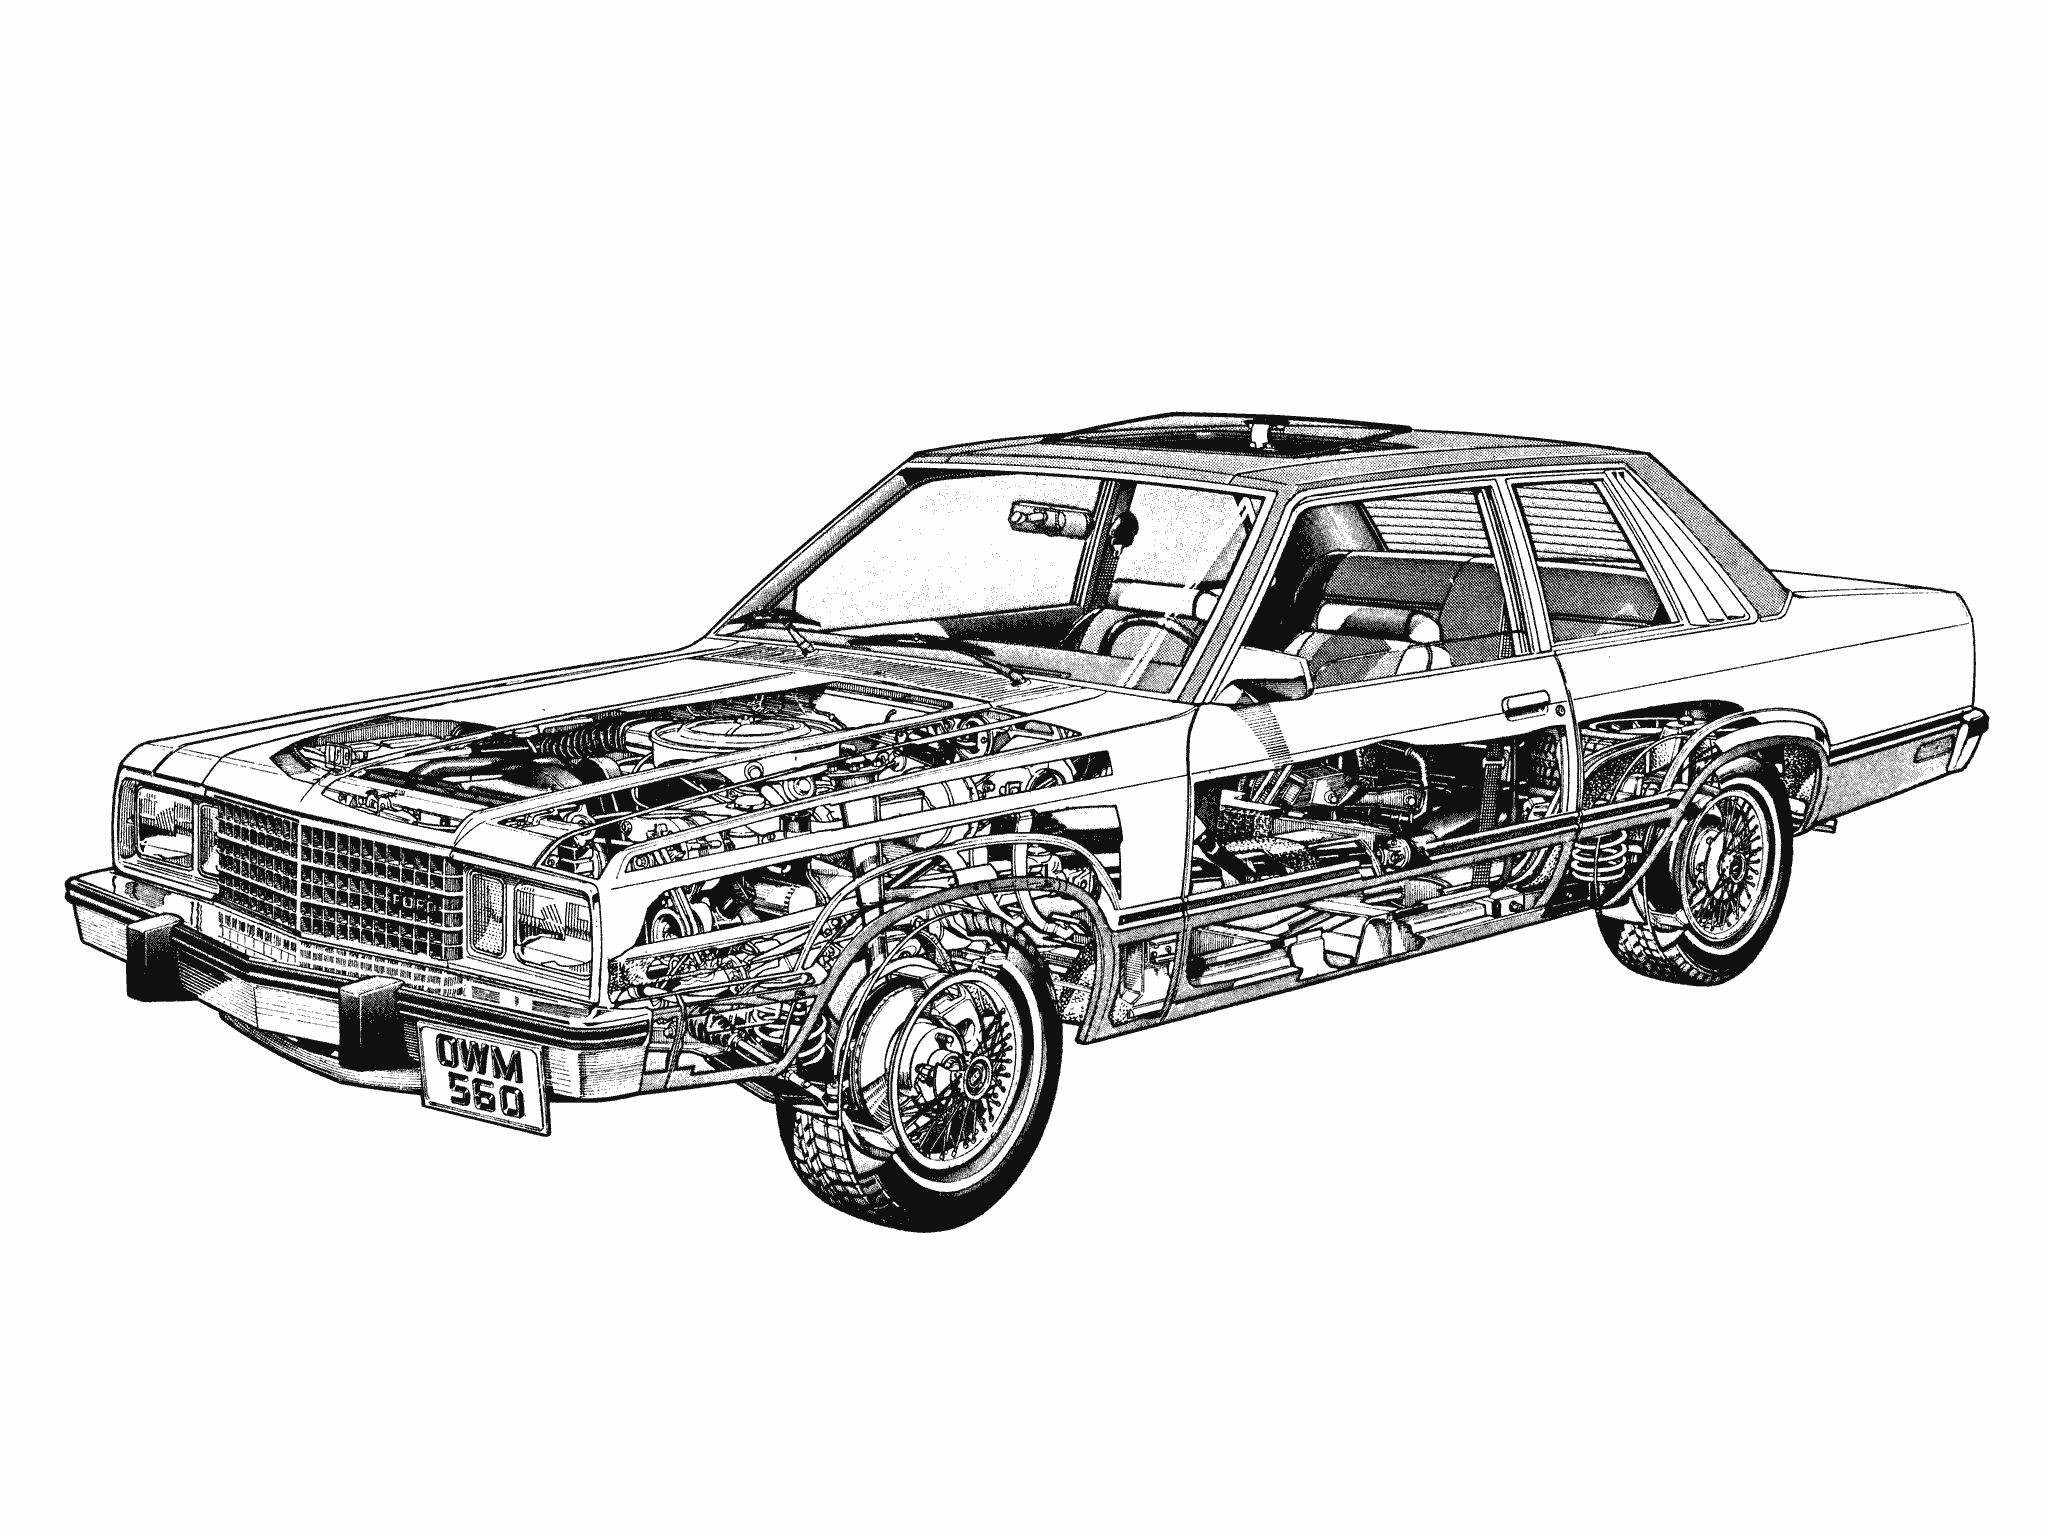 Ford Fairmont cutaway drawing